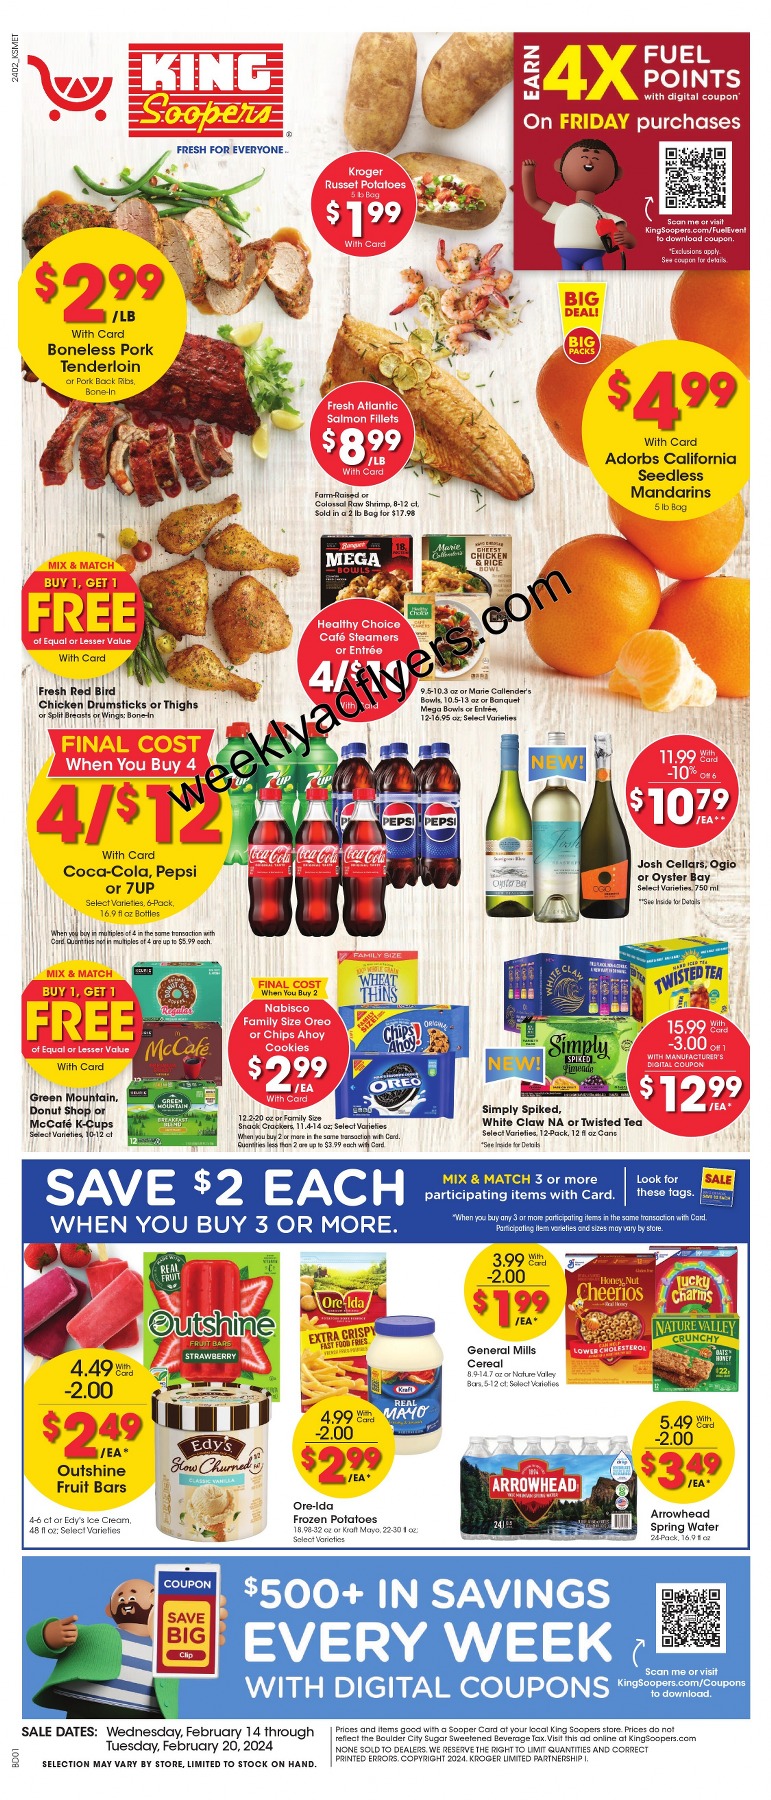 King Soopers Weekly Ad February 14 to February 20, 2024 1 – king soopers ad 1 1